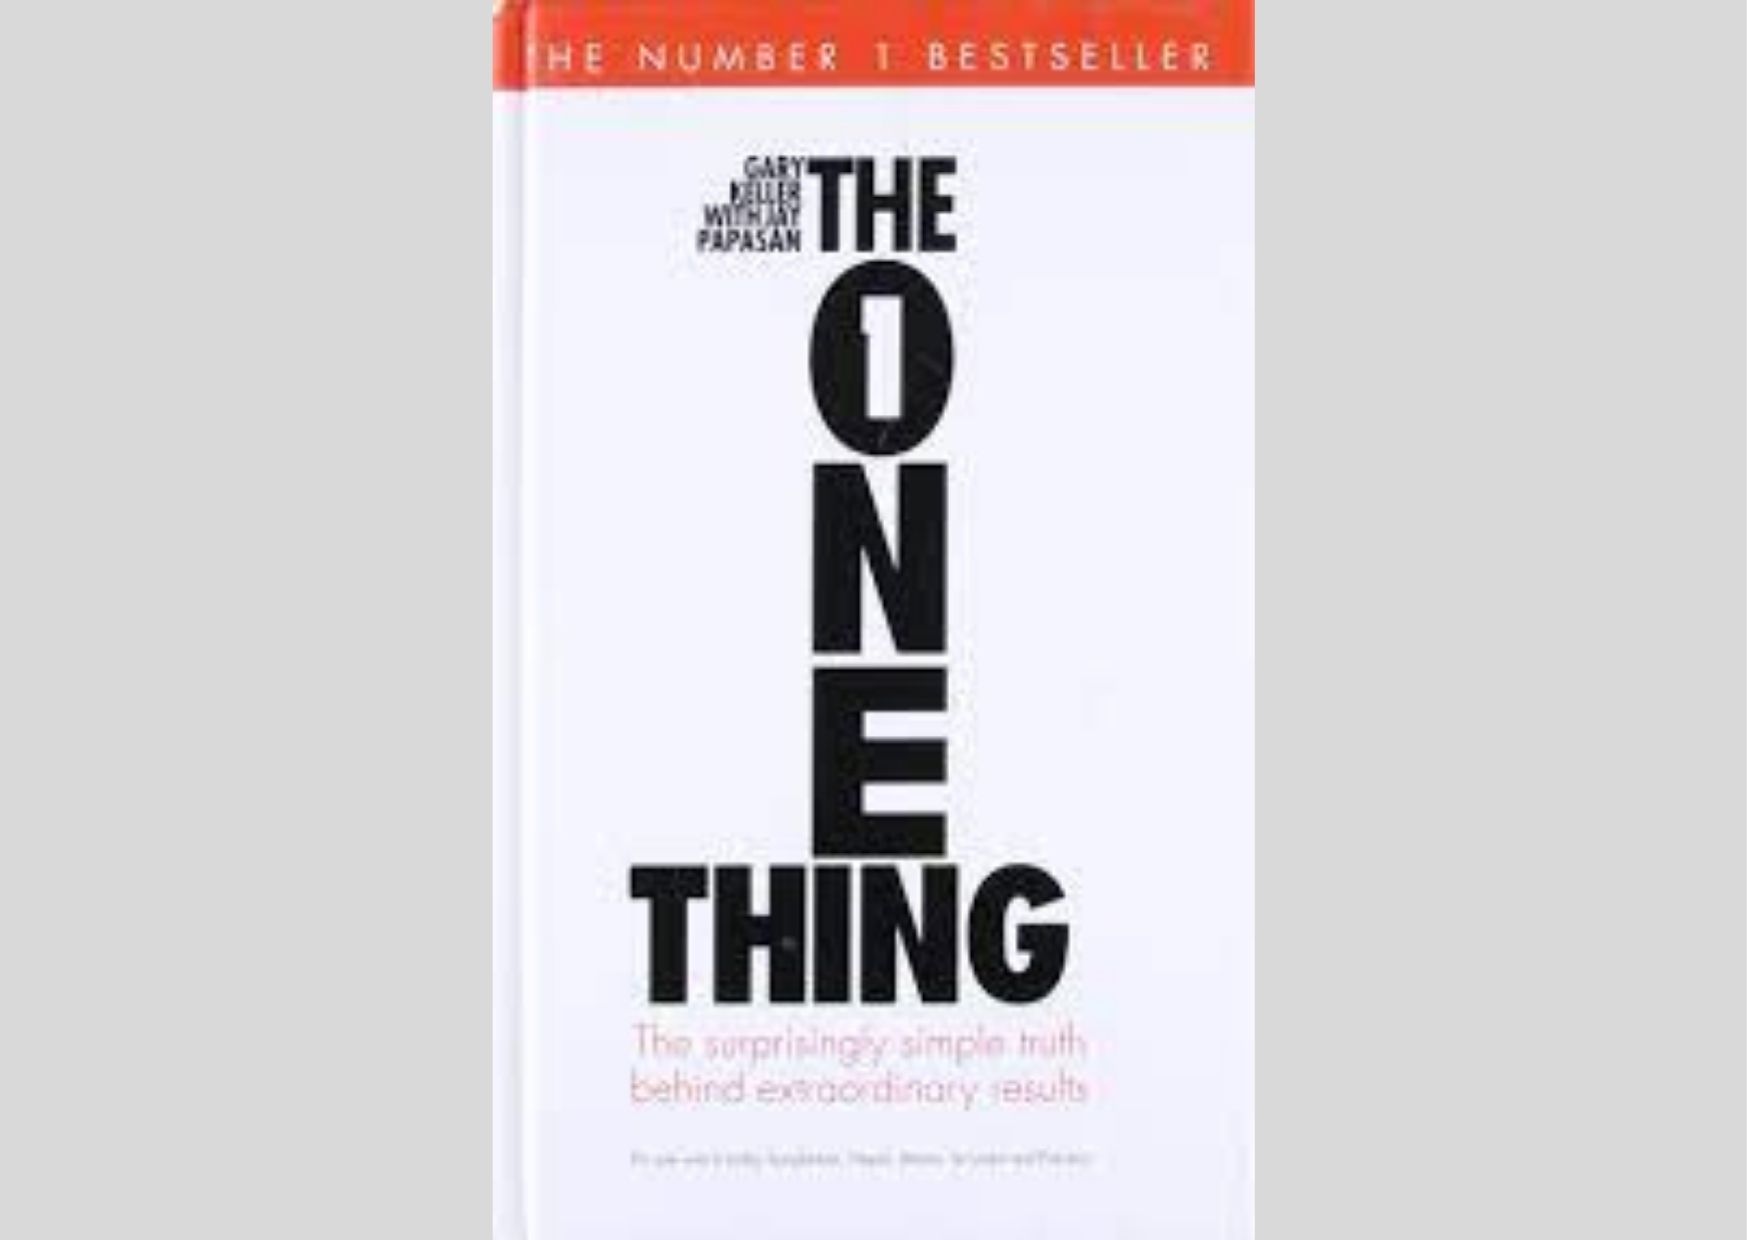 The 1 thing book. The one thing книга. The one thing Гэри Келлер книга. В фокусе книга Гэри Келлер. Книга в фокусе Гэри Келлер in English.